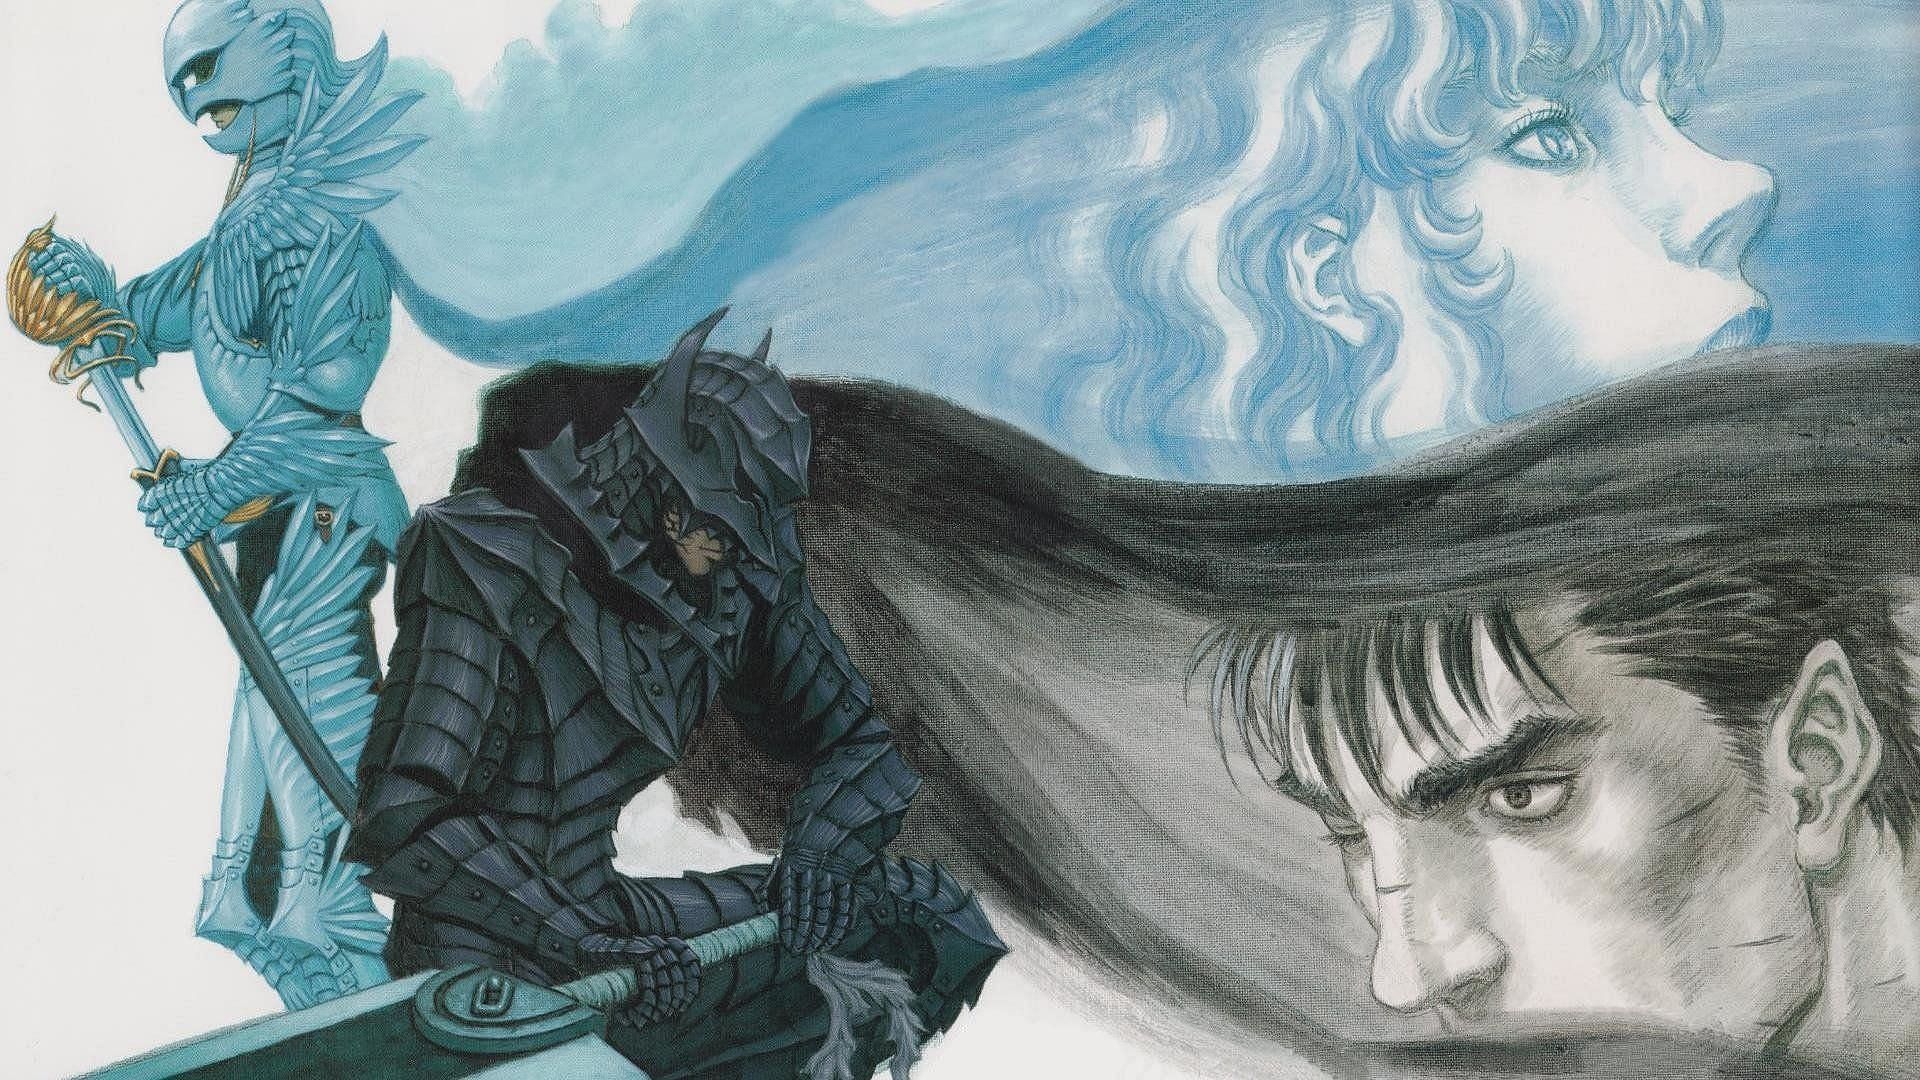 Guts and Griffith are one of the most iconic obssessed protagonist and antagonist pairs (Image via Hakusensha)